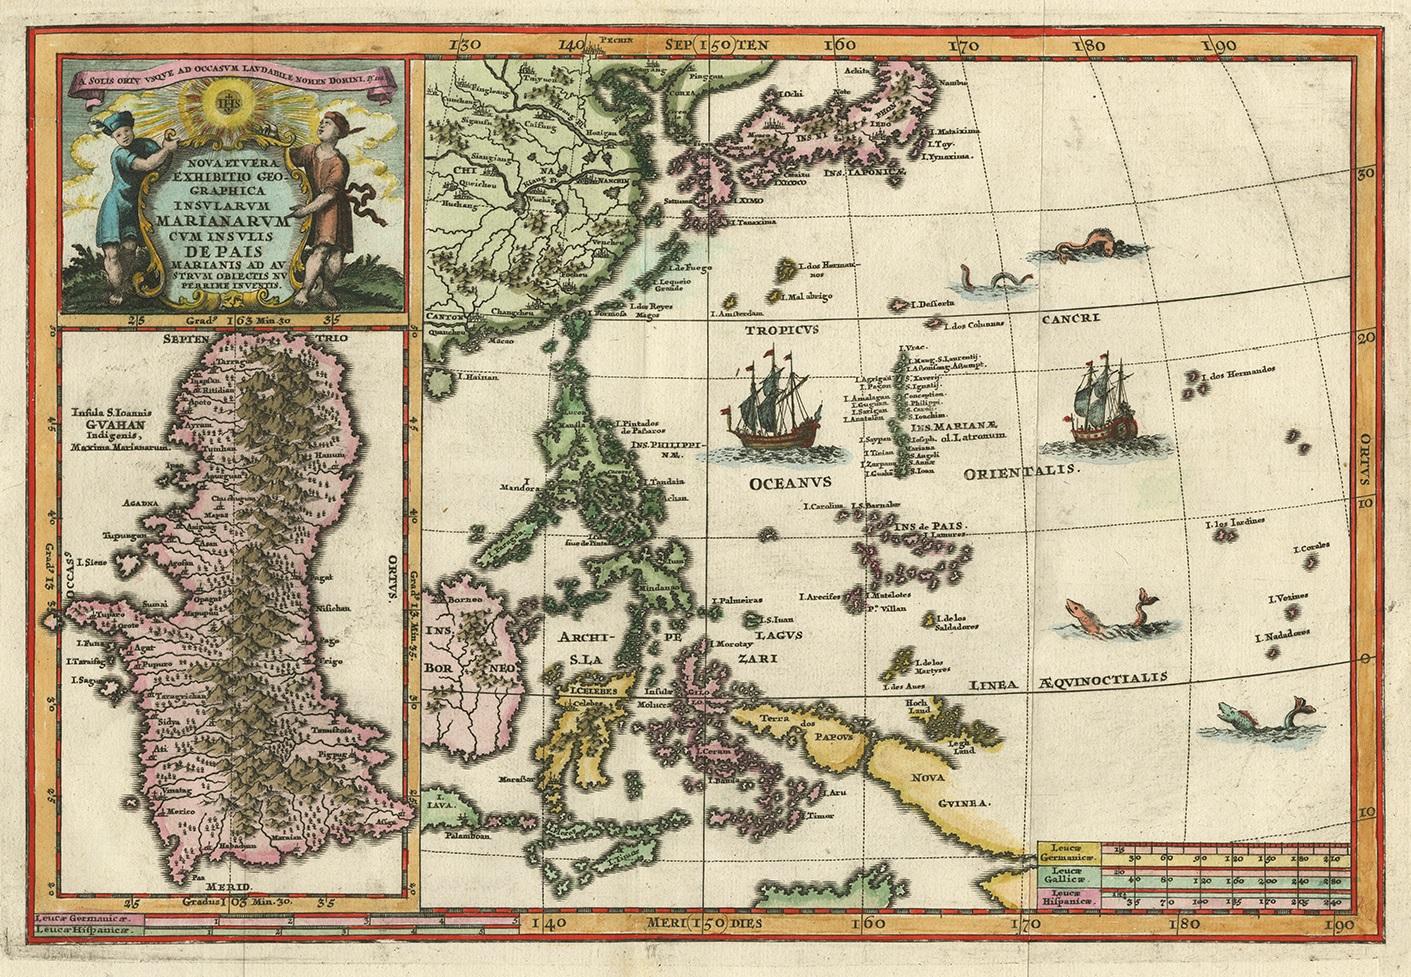 Antique map titled 'Nova et Vera Exhibitio Geographica Insularum Marianarum (..)'. Rare and very attractive map of the Mariana Islands, Philippines, Korea, Japan and Indonesia with an inset of the island Guam. Published by H. Scherer, circa 1702.